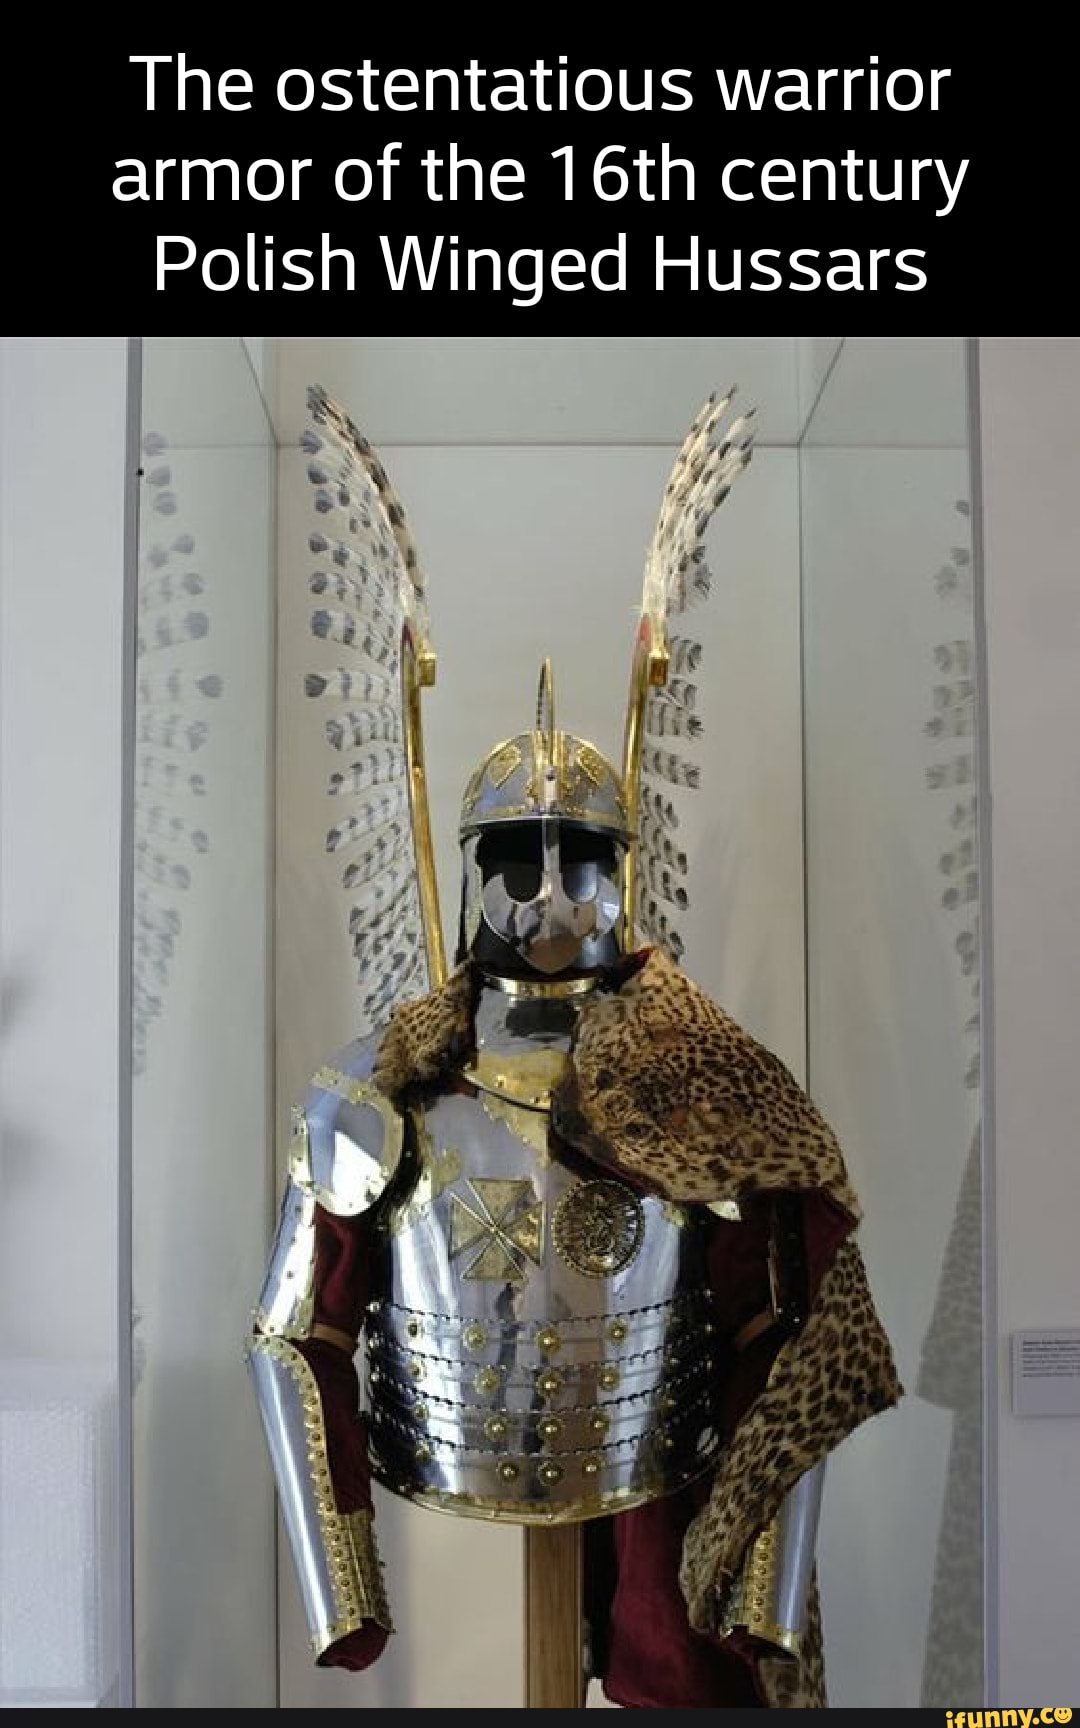 The ostentatious warrior armor of the 16th century Polish Winged